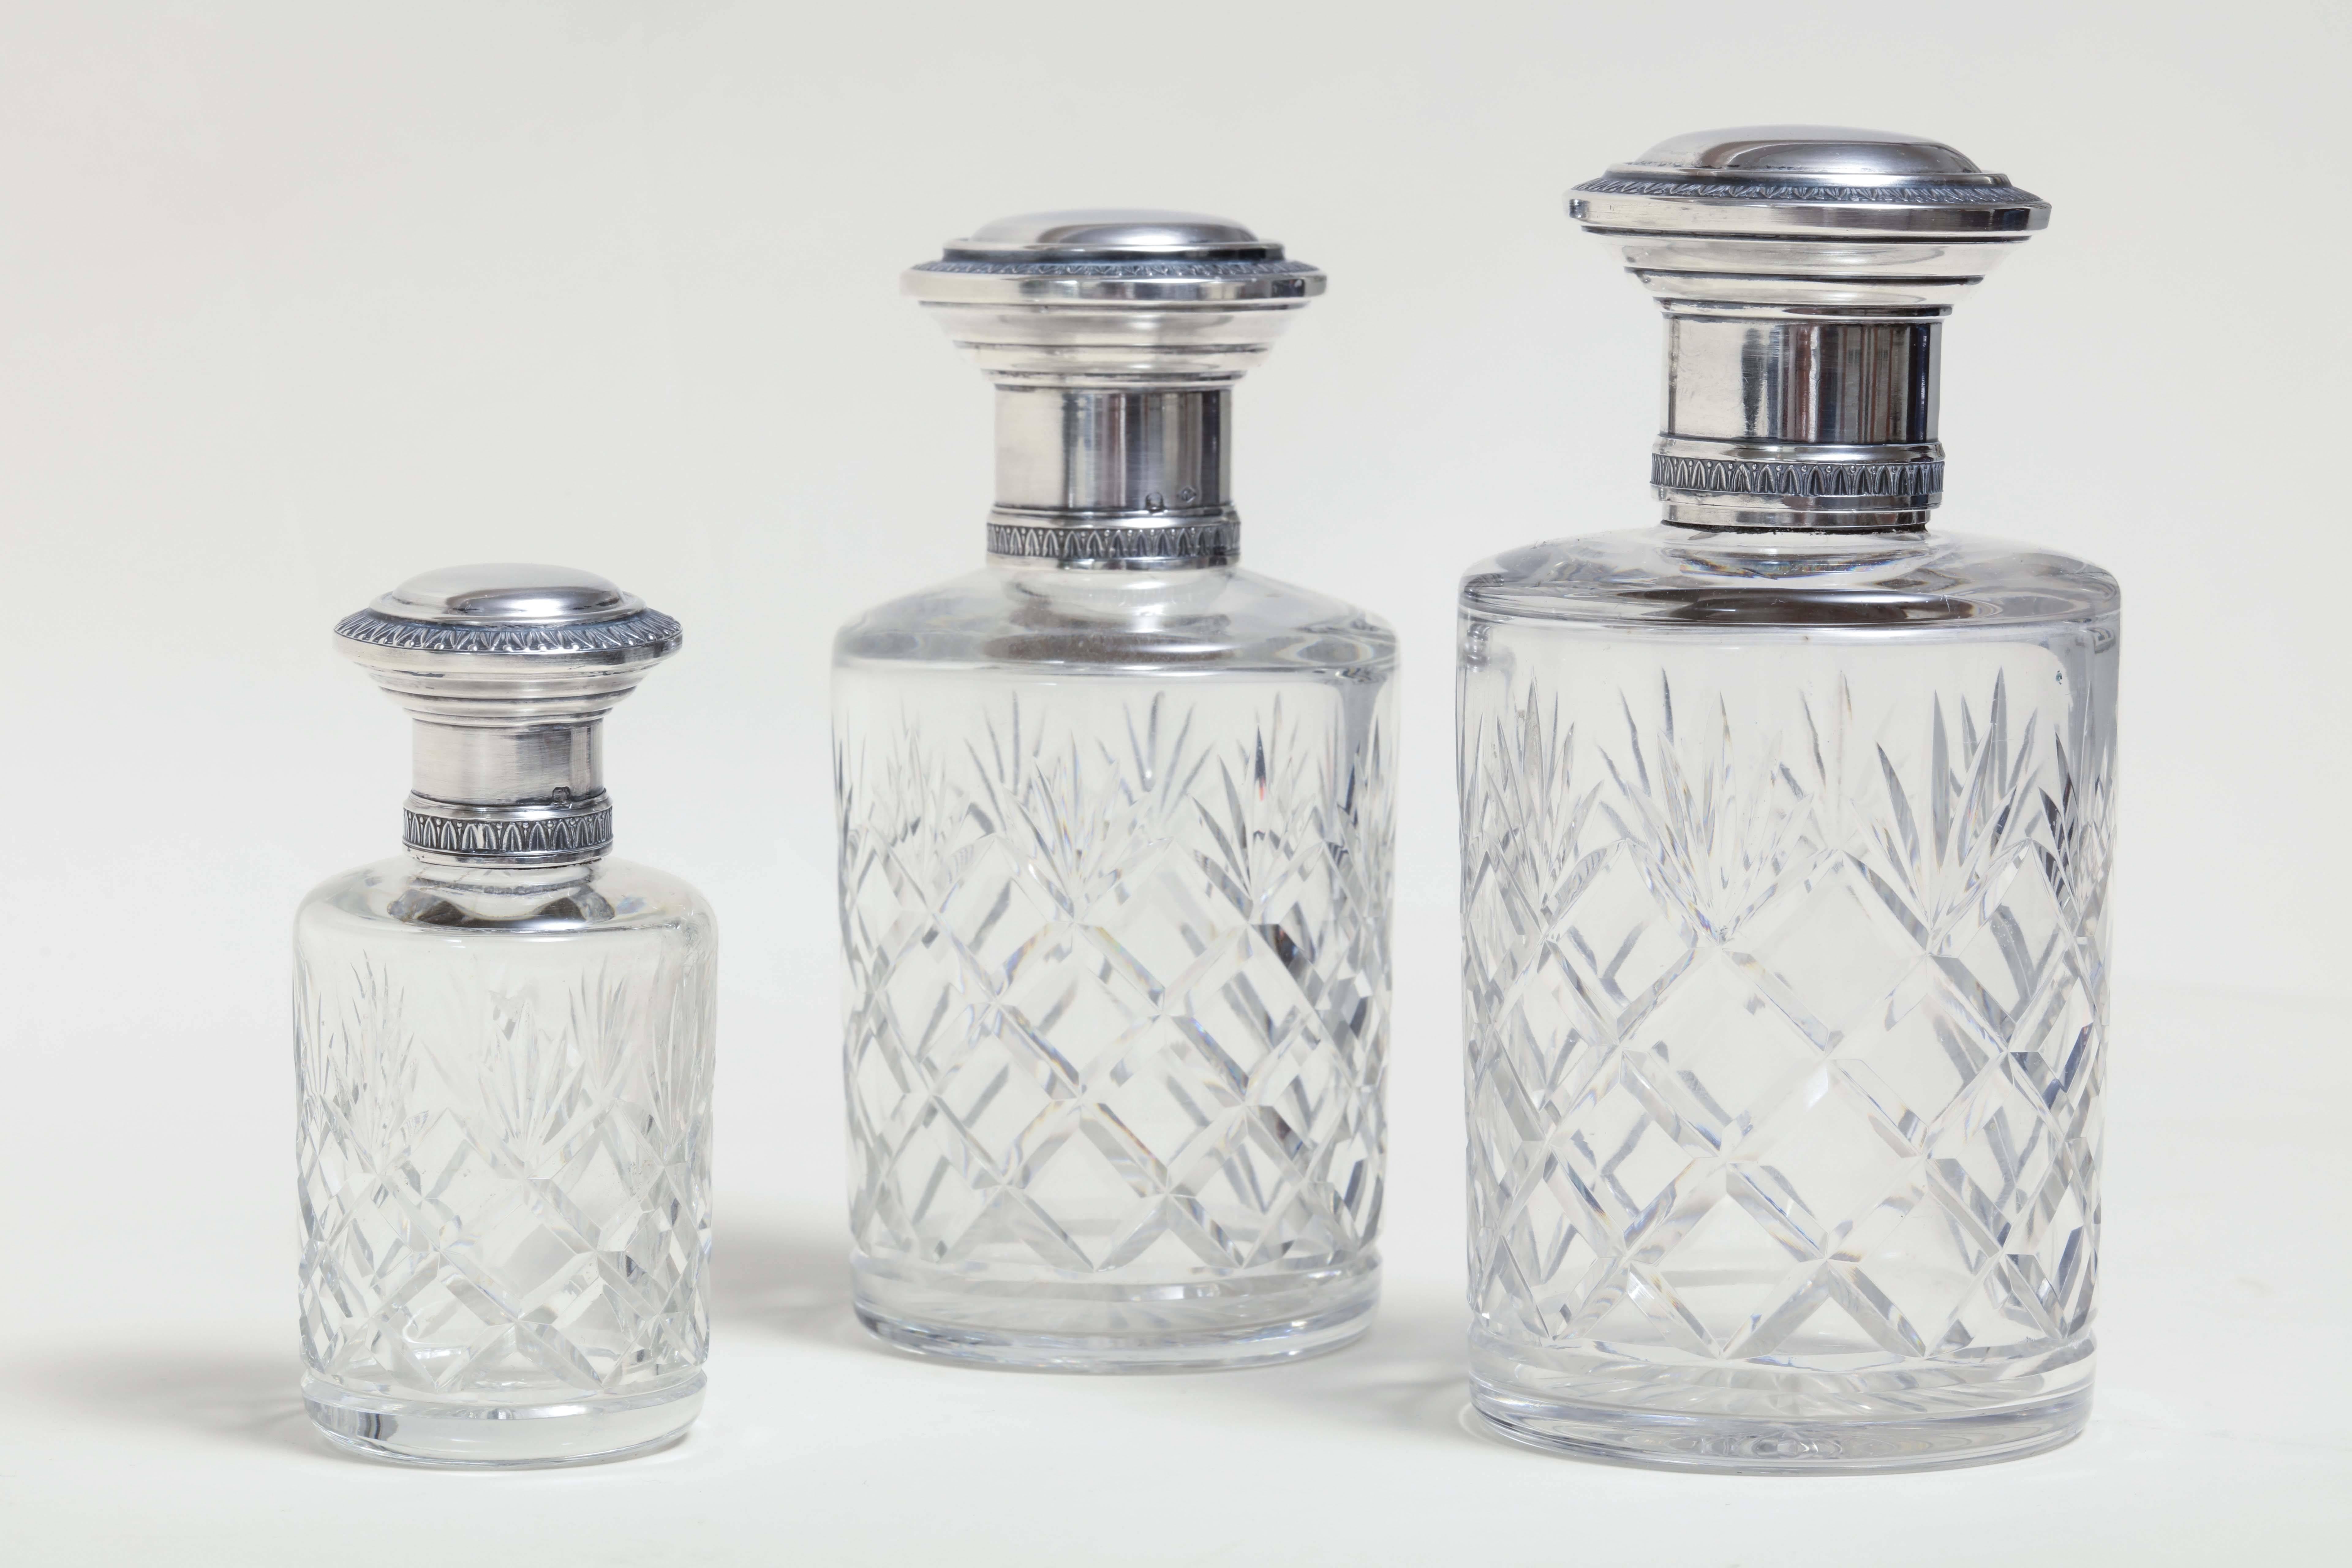 With carve crystal bodies, glass stoppers for the two larger flacons and sterling silver tops.

Measures: 6” high; 2 7/8” wide,
5 5/8” high; 2 ¾” wide,
4” high; 1 7/8” wide.

Impressed with Minerve for 950 silver/ maker’s poincon.
 